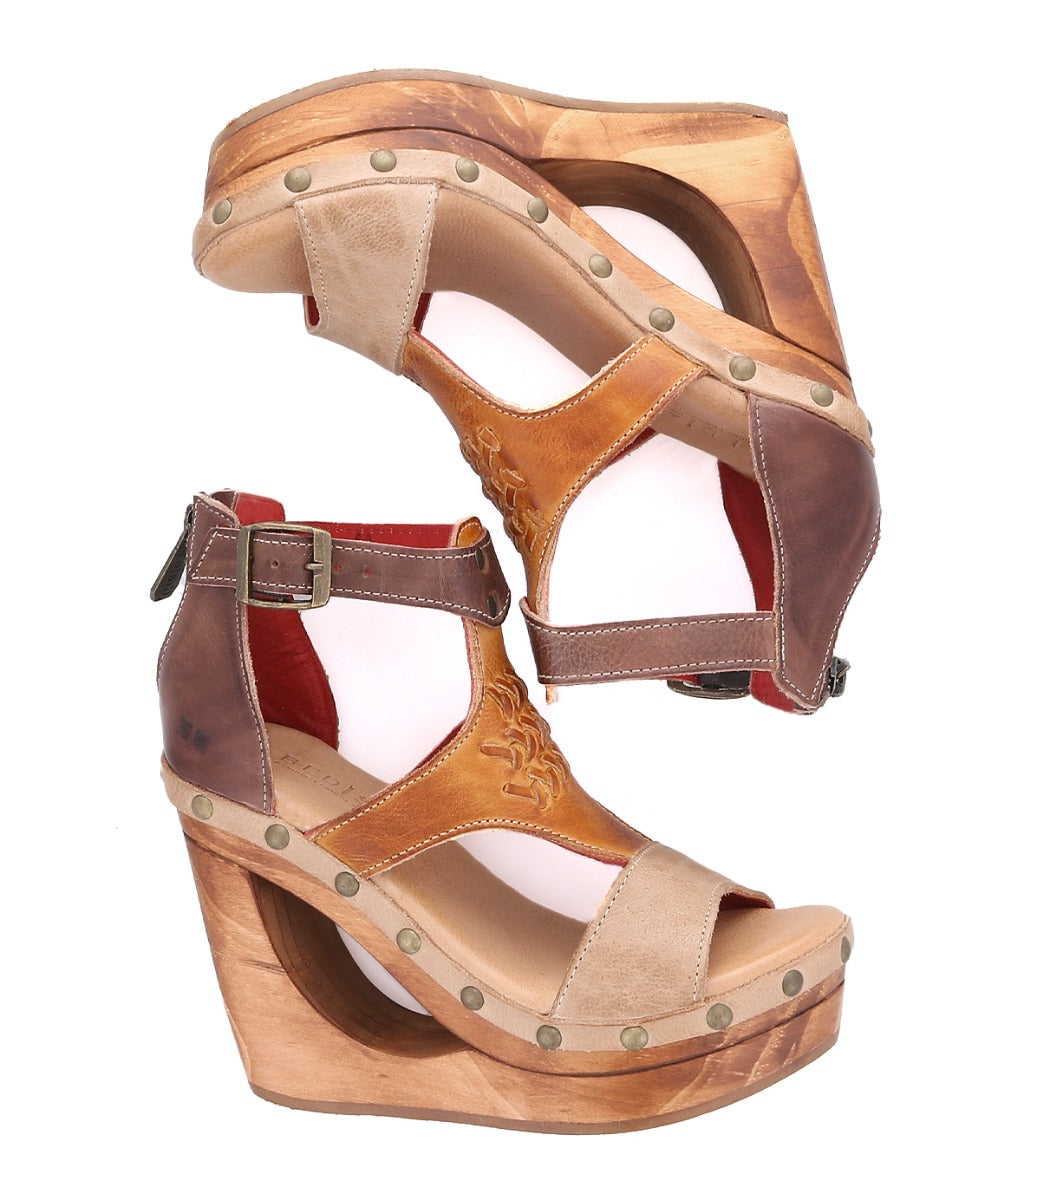 A pair of Bed Stu Millennial wooden wedge sandals with straps and buckles.